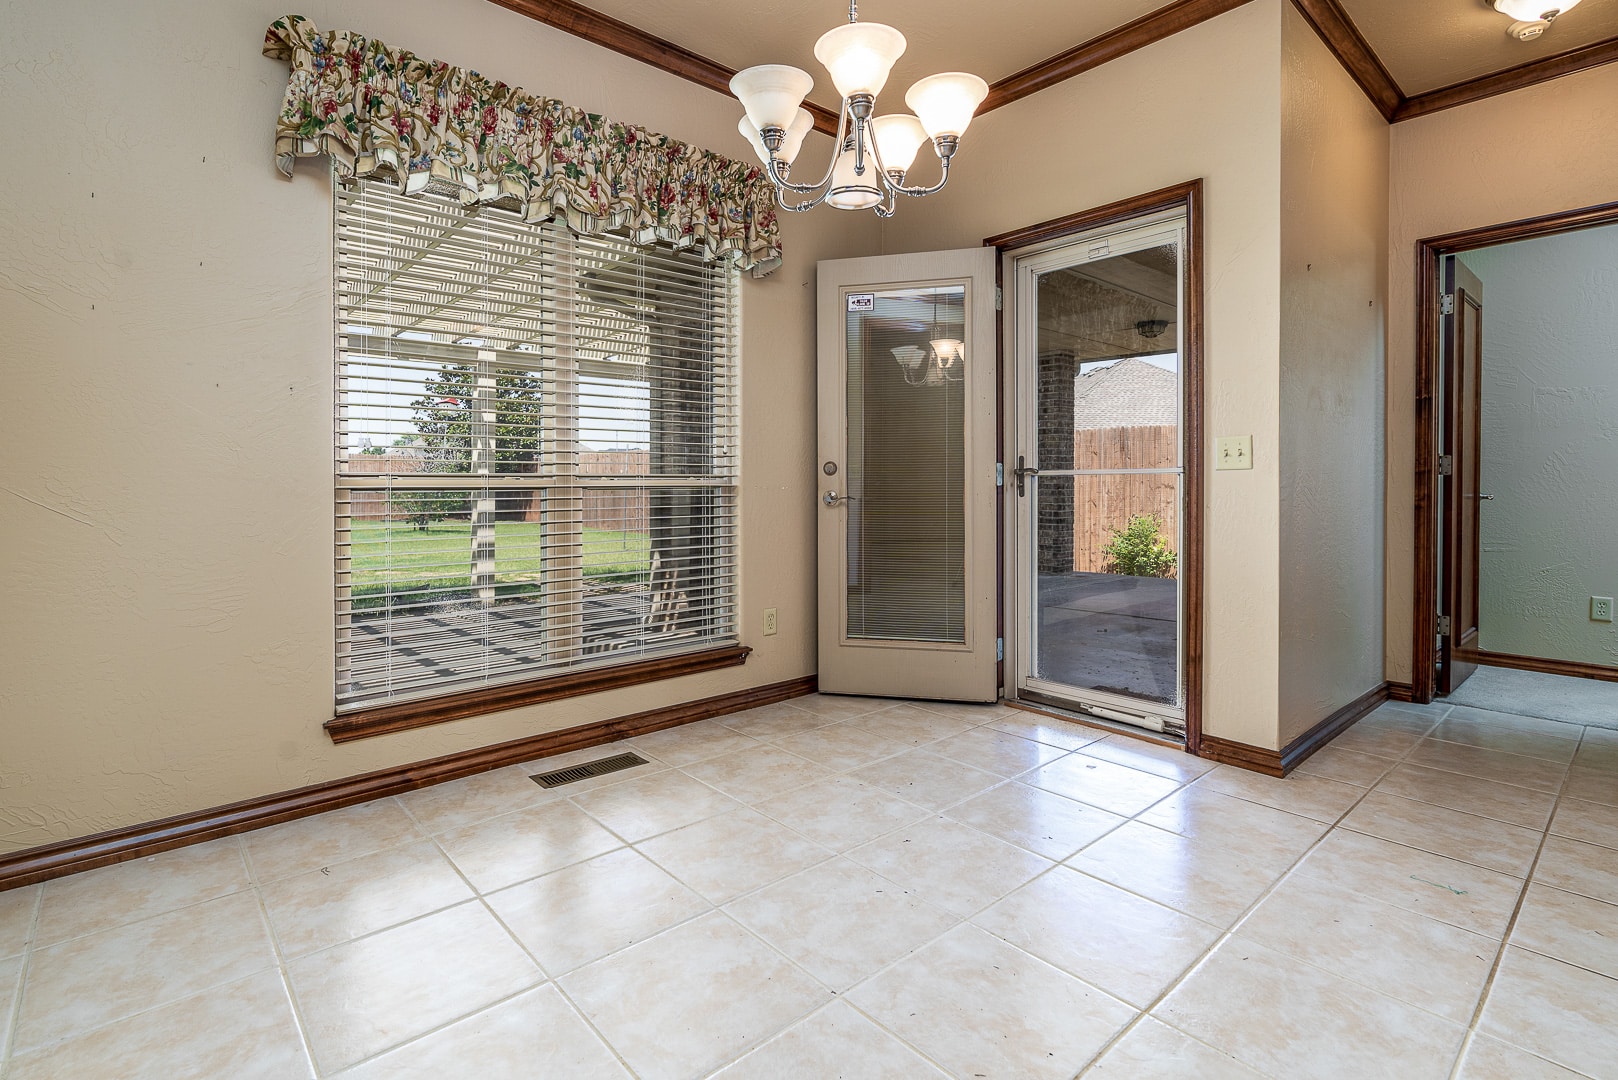 A room with a sliding glass door and tiled floor.